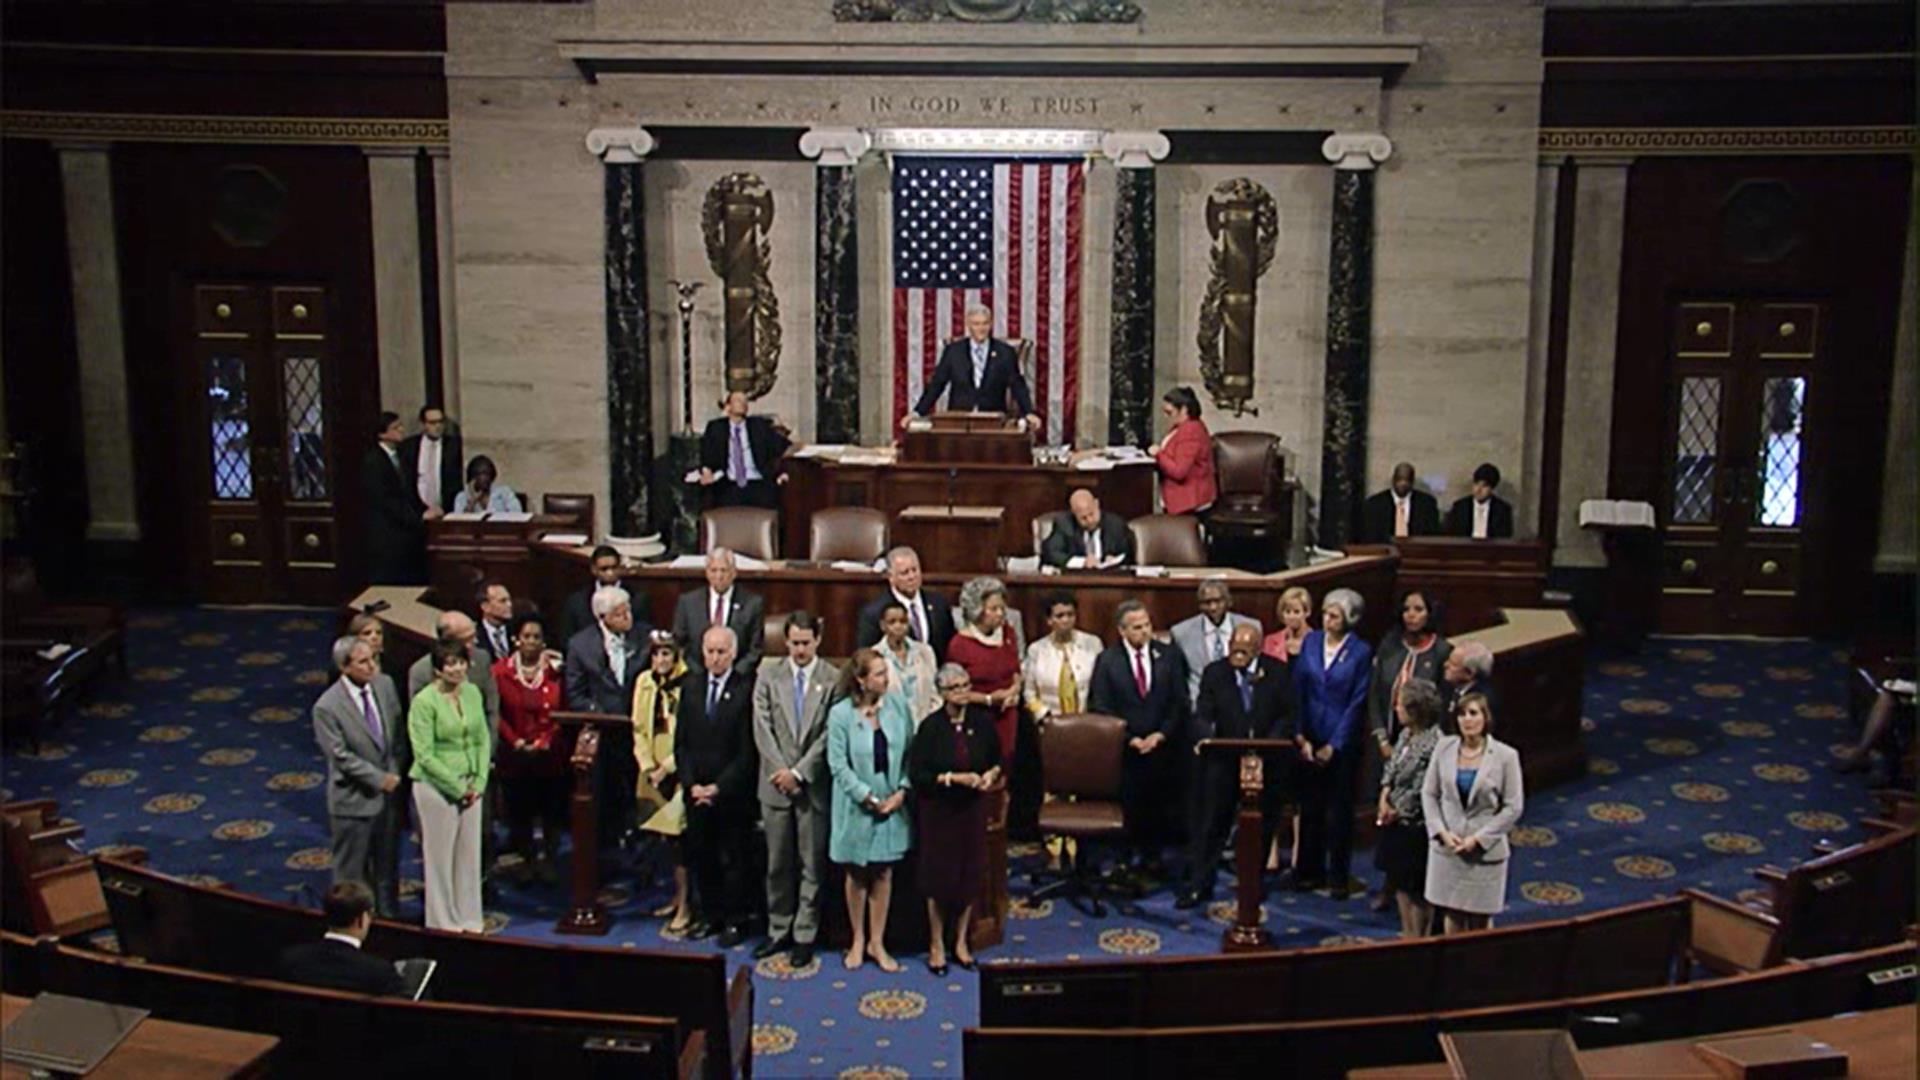 U.S. House Democrats begin their sit-in protest of no gun control measures being voted on in the chamber.